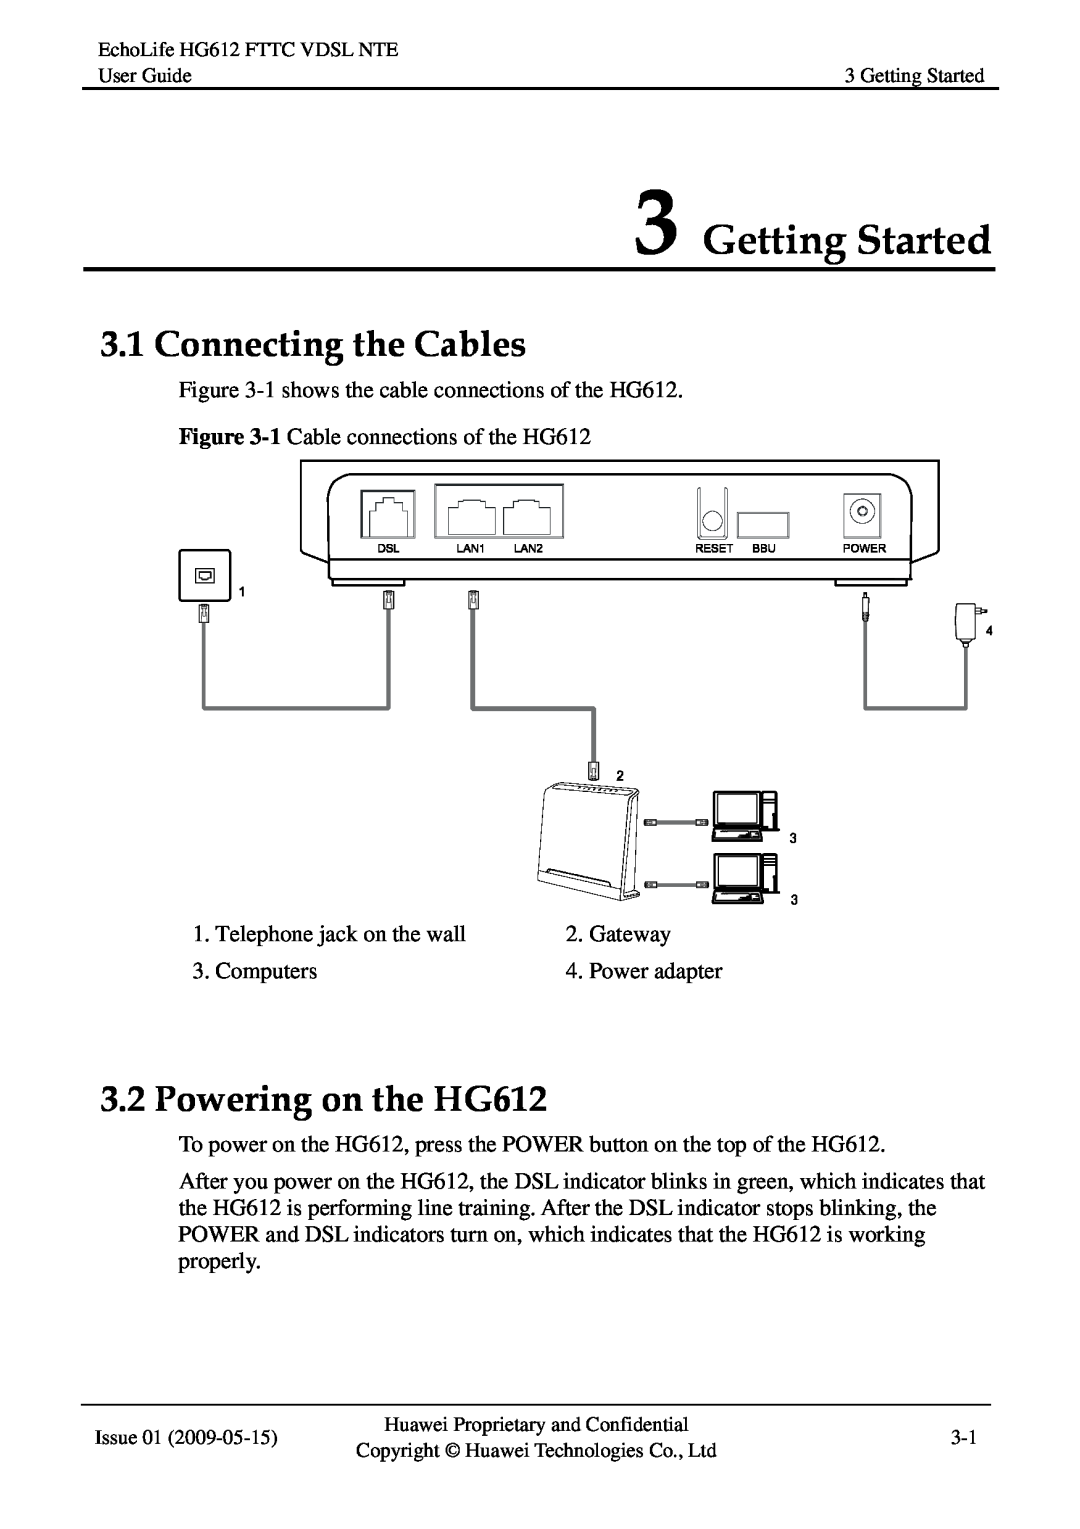 Huawei HG612FTTC VDSL NTE manual Getting Started, Connecting the Cables, Powering on the HG612 